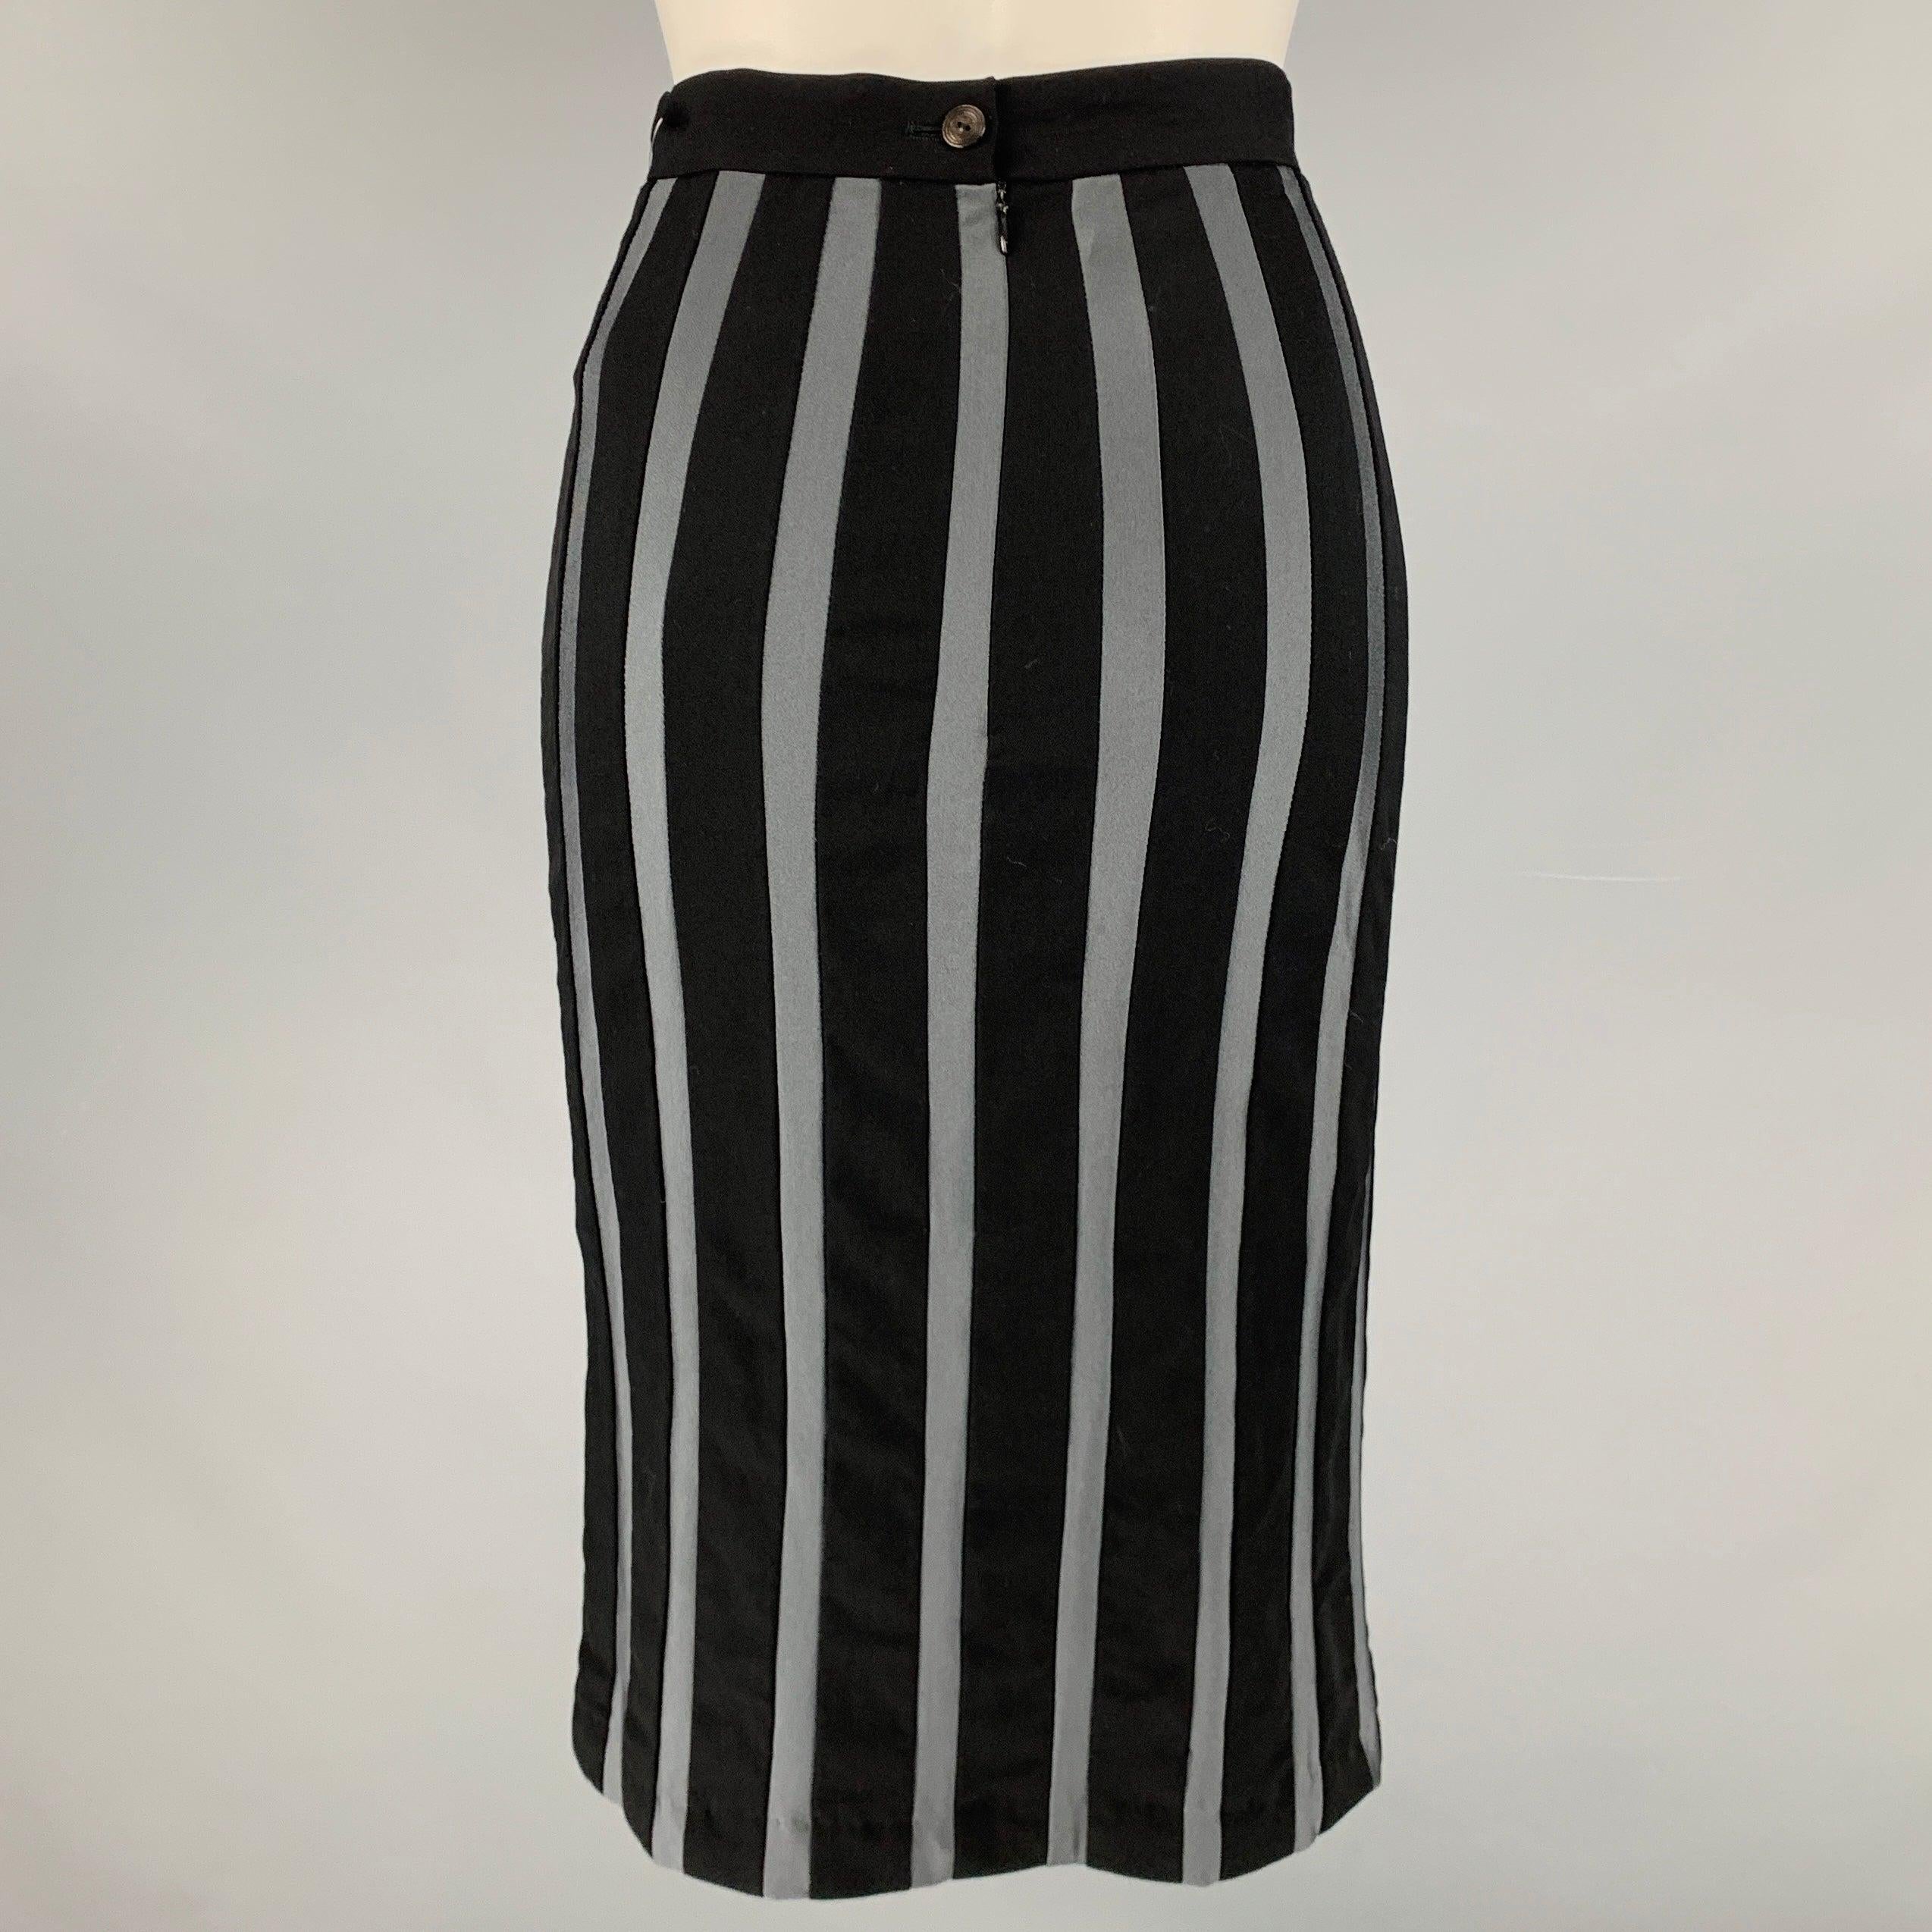 JEAN PAUL GAULTIER skirt
in a
black and grey fabric featuring a vertical stripe pattern, pencil style, and zipper closure.Very Good Pre-Owned Condition. Mark on front of skirt, and fabric tags removed. 

Marked:   40. 

Measurements: 
  Waist: 25